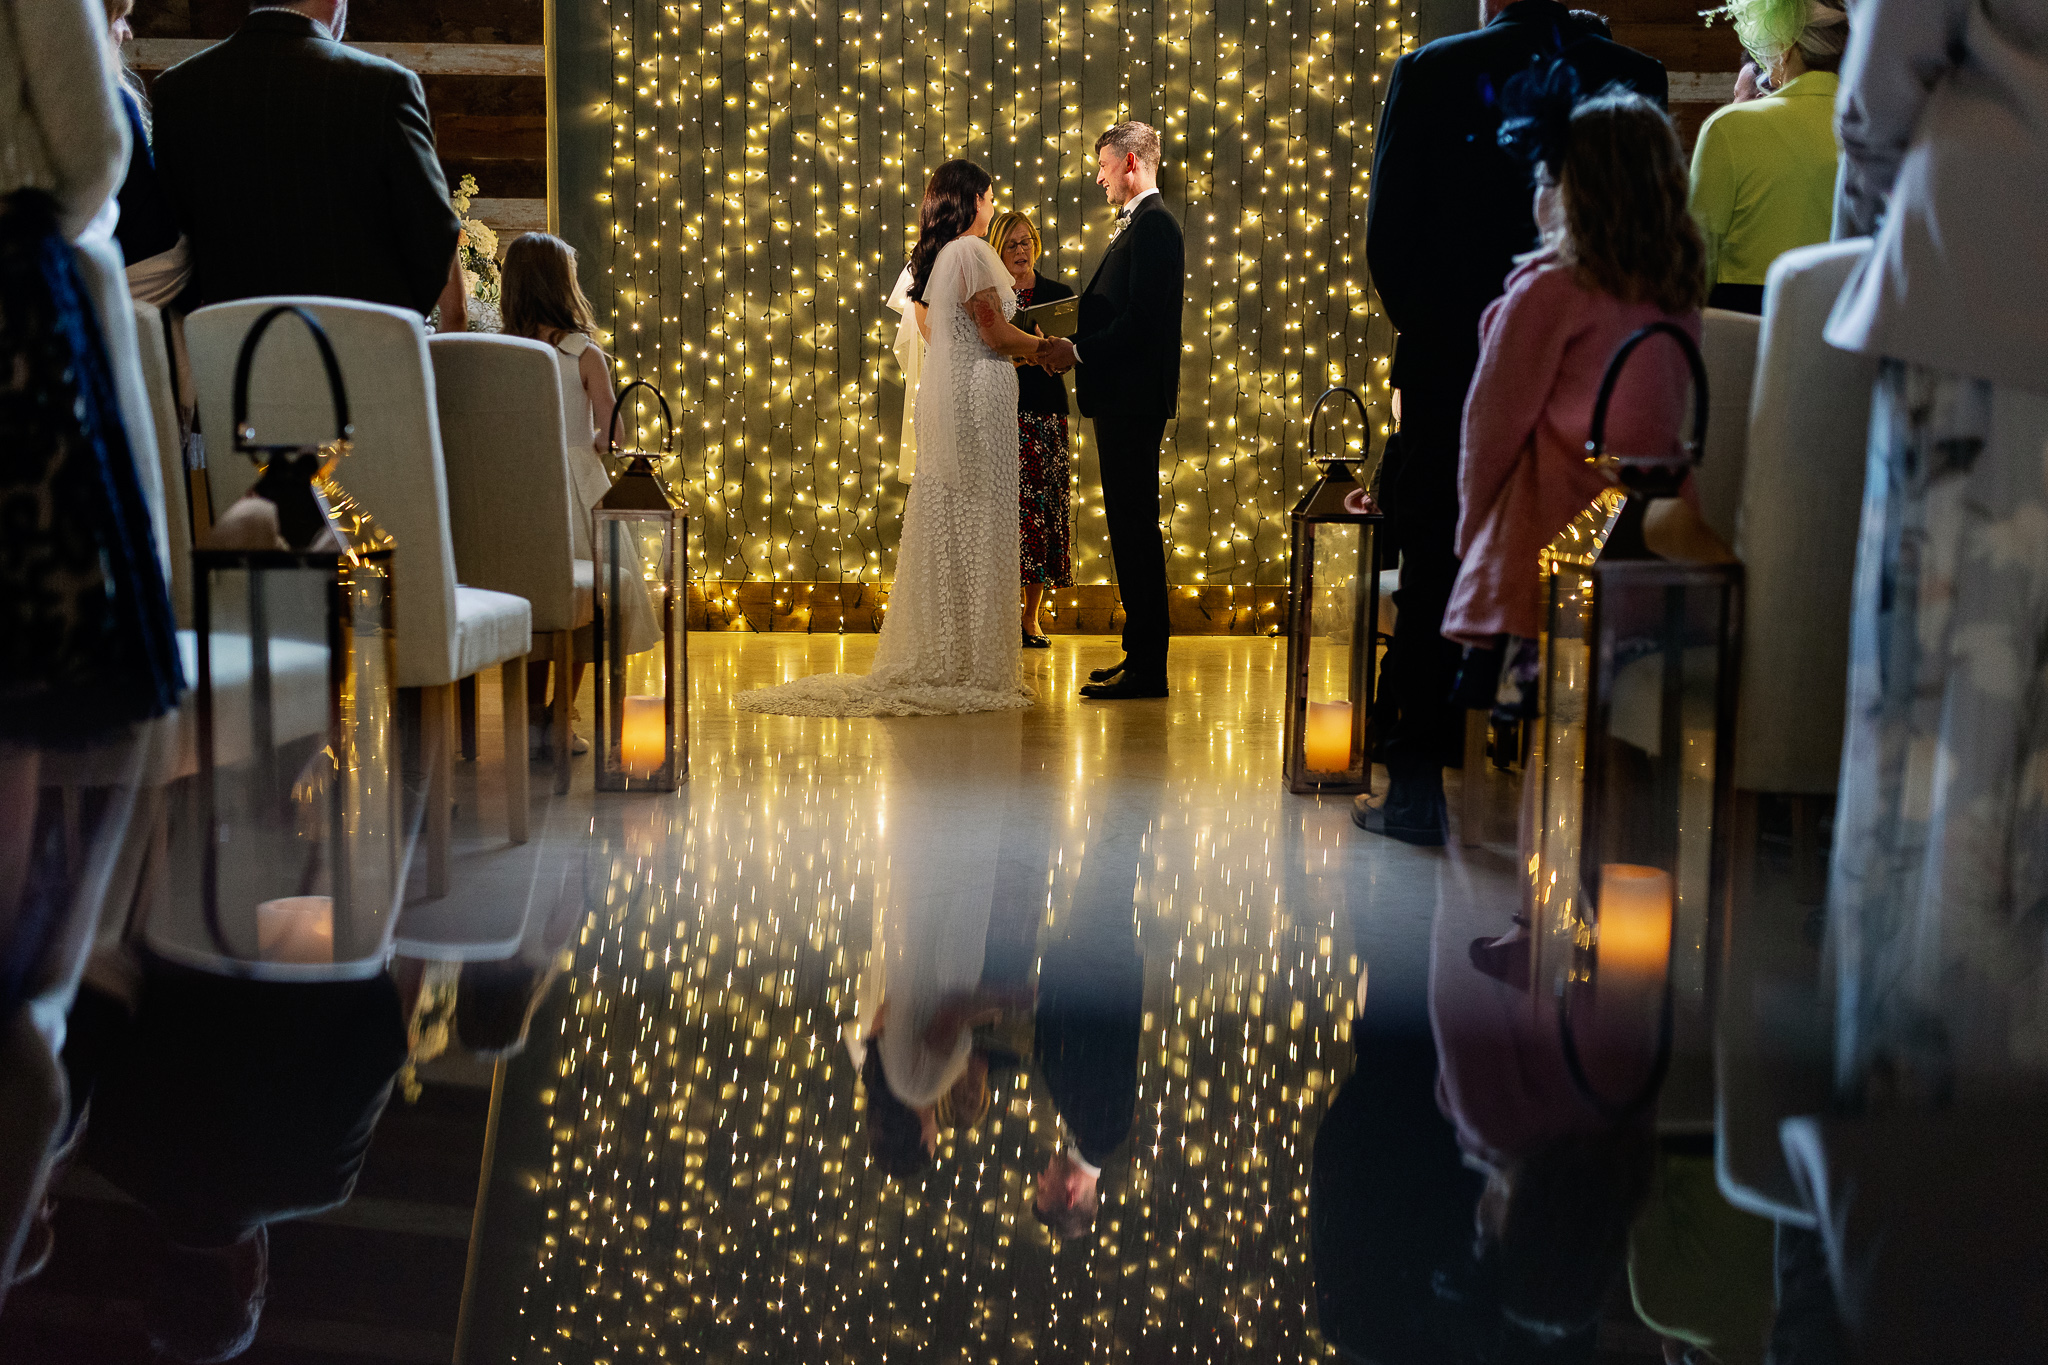 Getting married in front of a string of lights